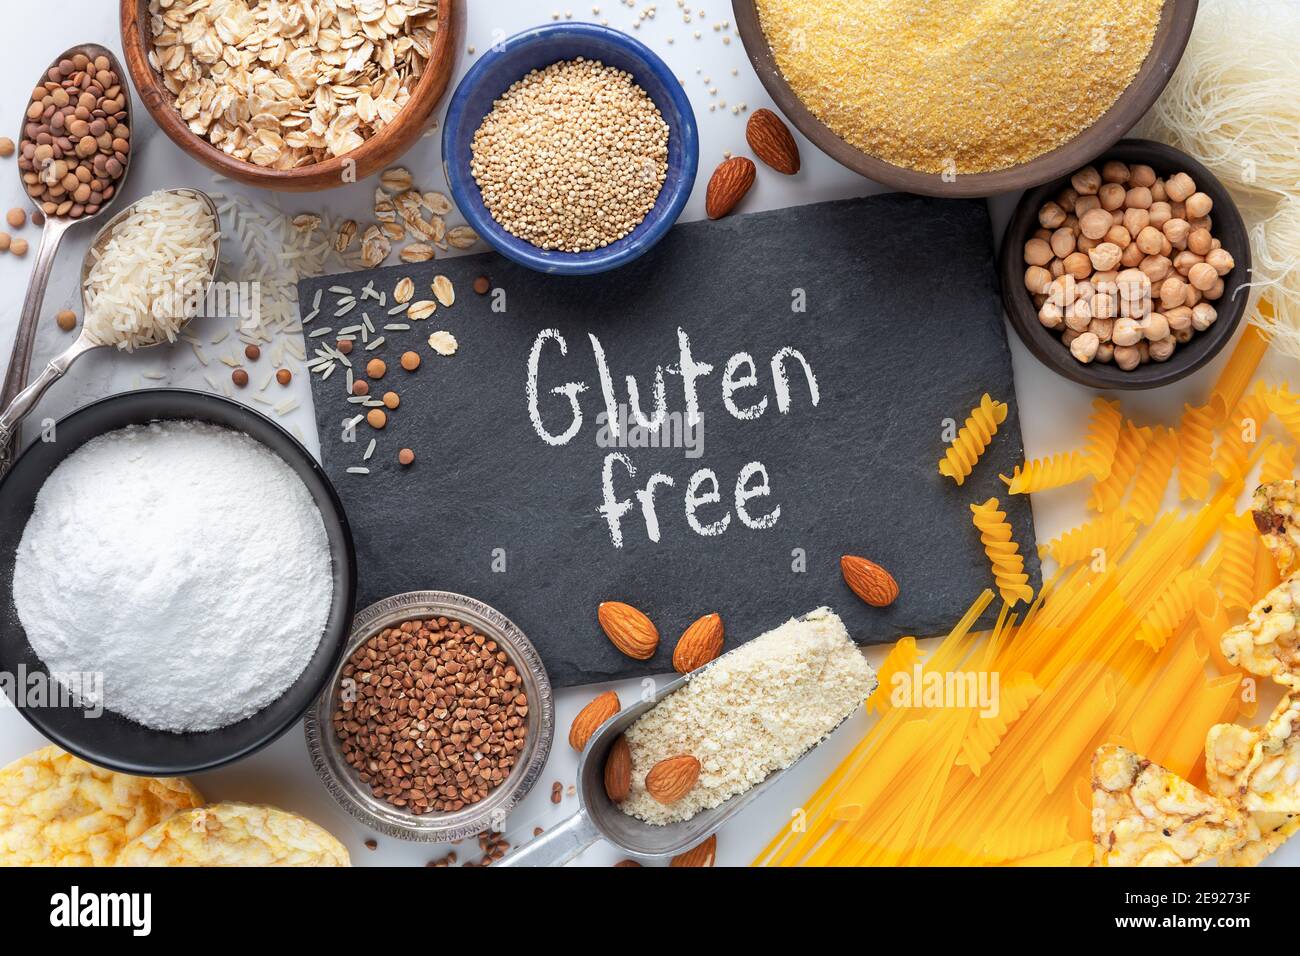 Gluten free food concept showingh the veriety of products - pasta, flour, snacks, legumes and cereal - with Gluten free text written on black slate bo Stock Photo